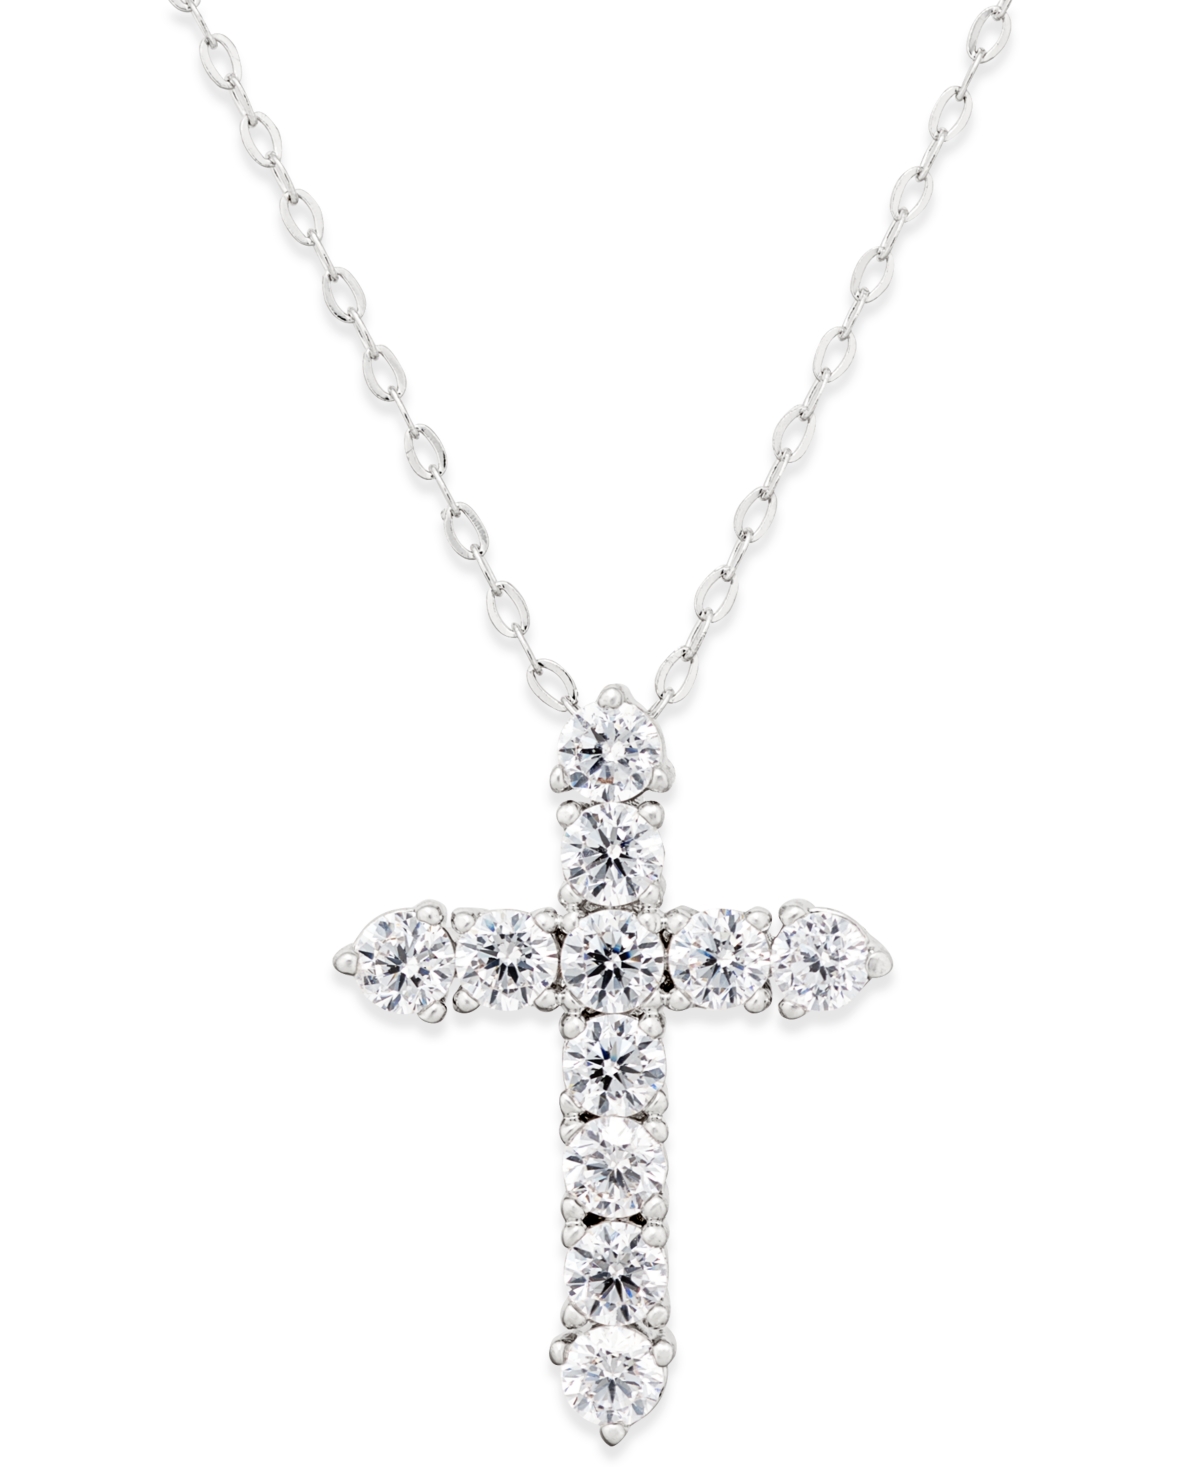 Silver-Tone Crystal Cross Pendant Necklace, Created for Macy's - Silver